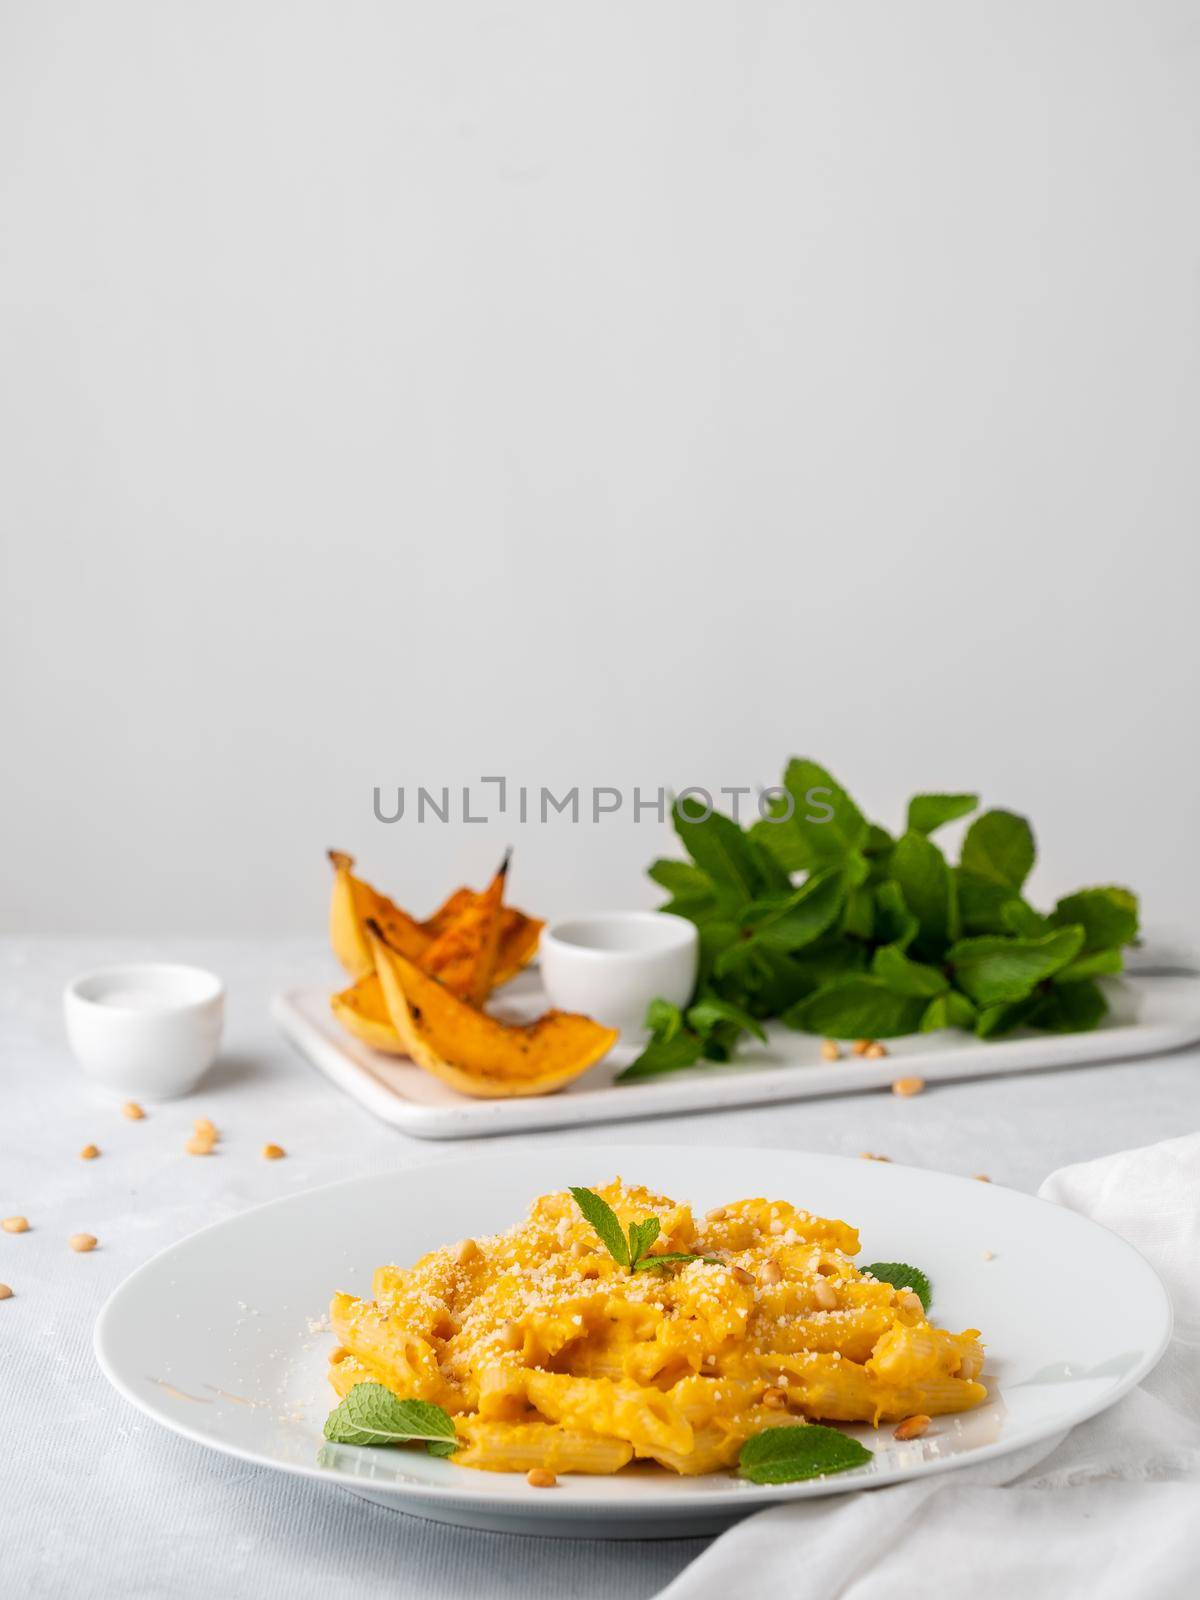 Pumpkin pasta penne with thick creamy sauce of baked squash and parmesan, side view, vertical